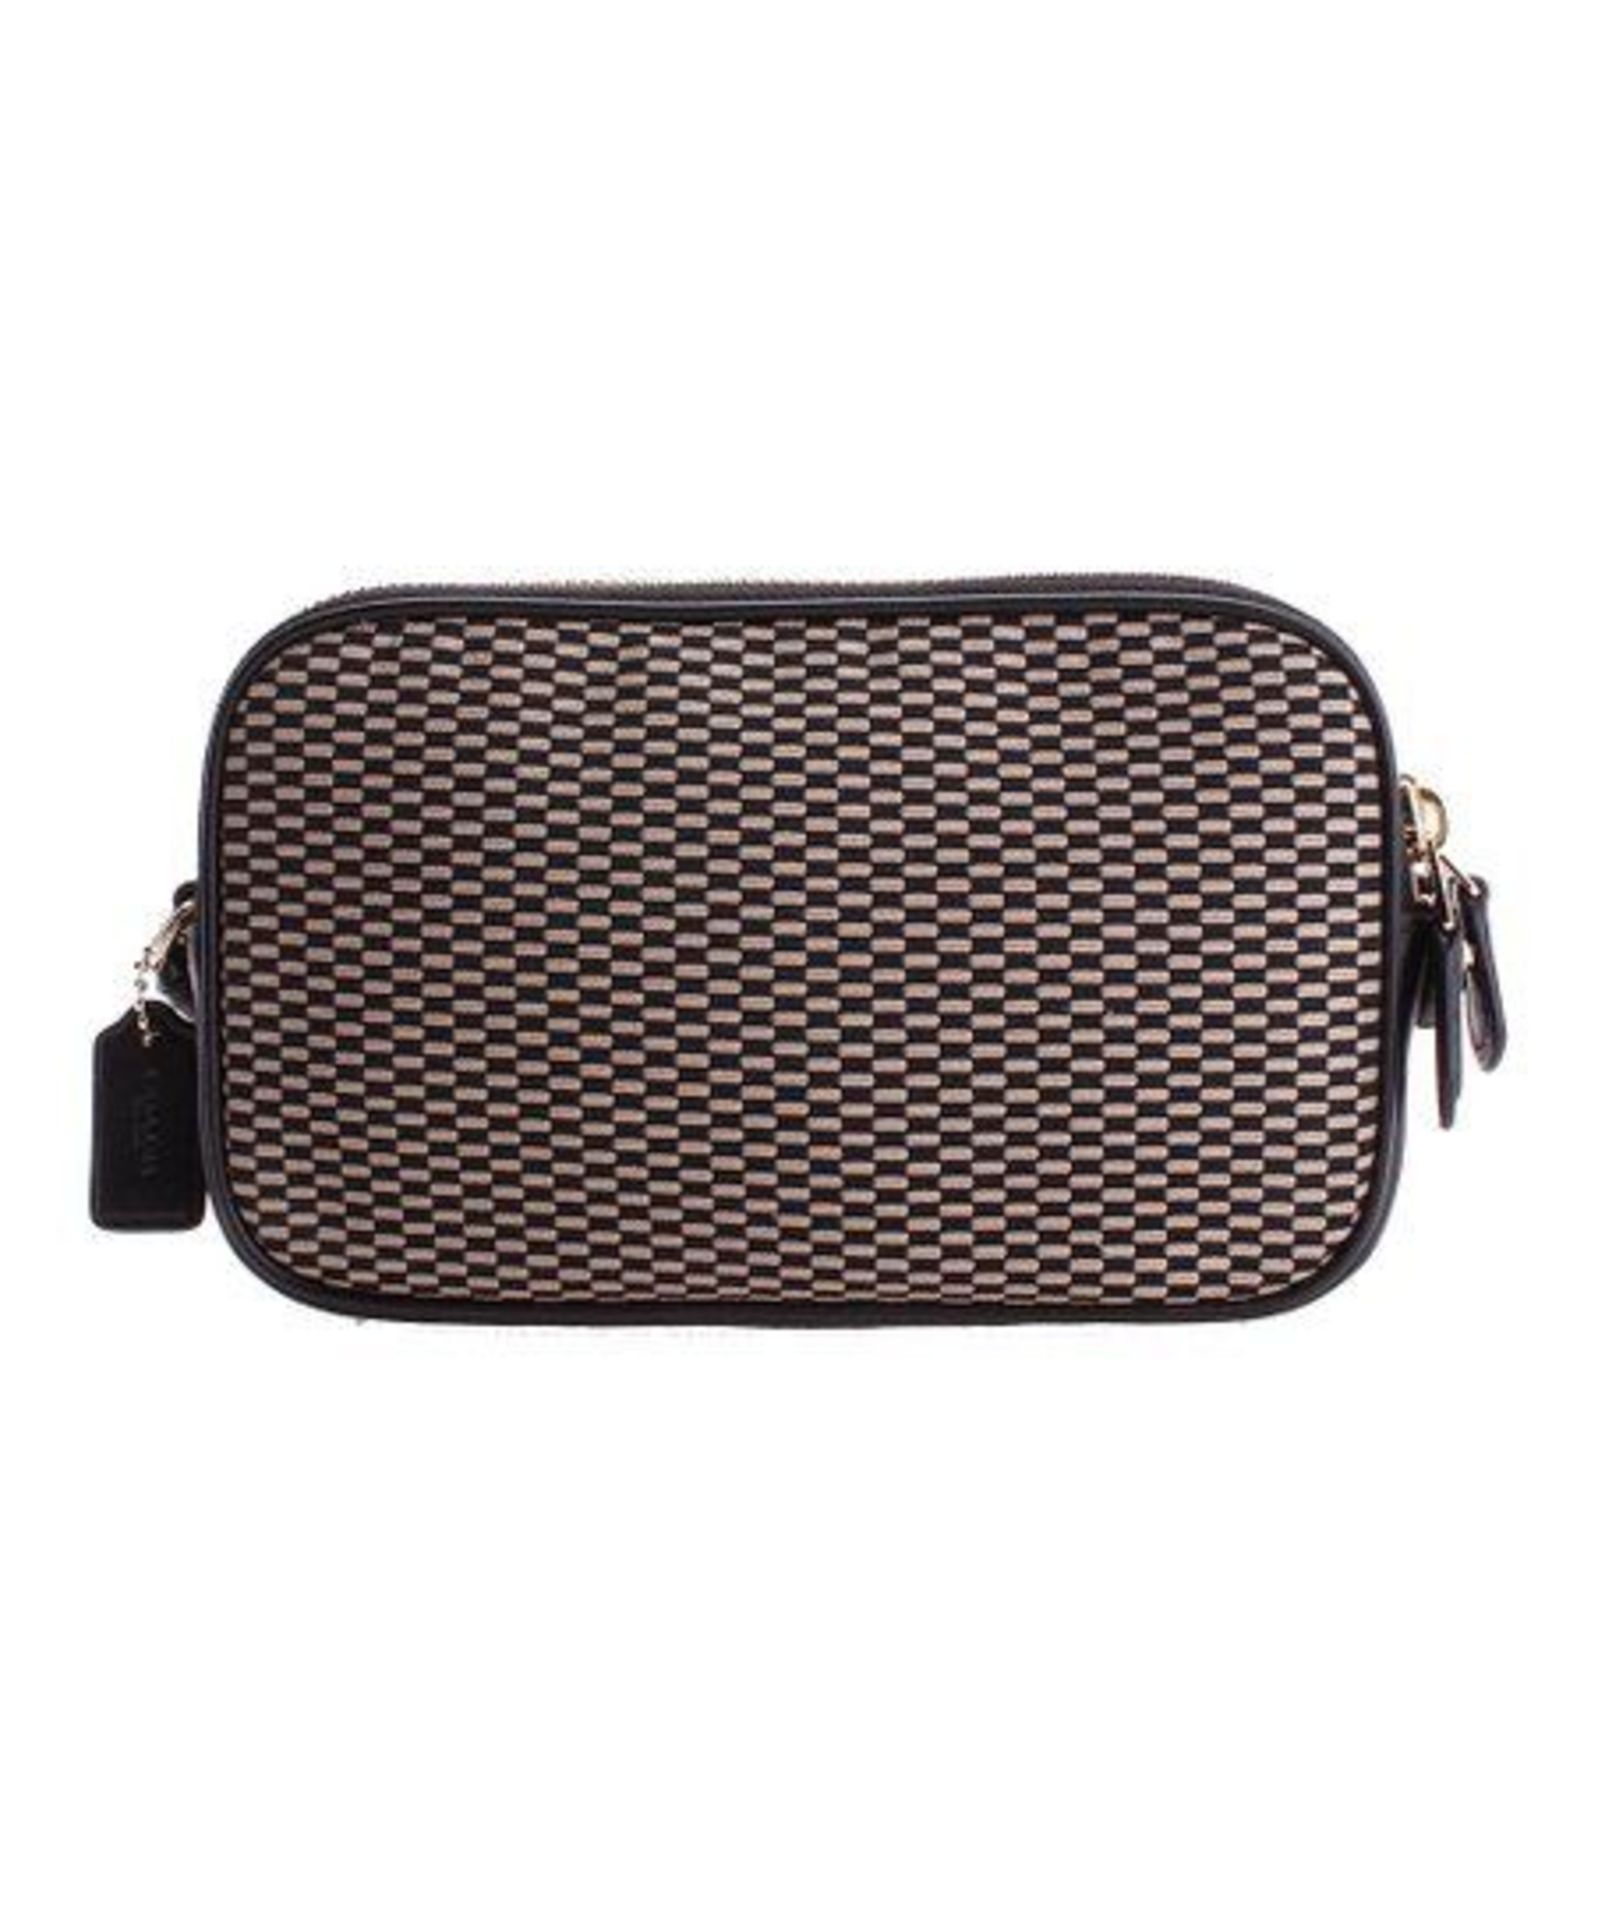 Coach, Milk & Black Woven Leather Crossbody Bag (New With Tags) [Ref: 53354083A/Etf]-Tf - Image 2 of 4